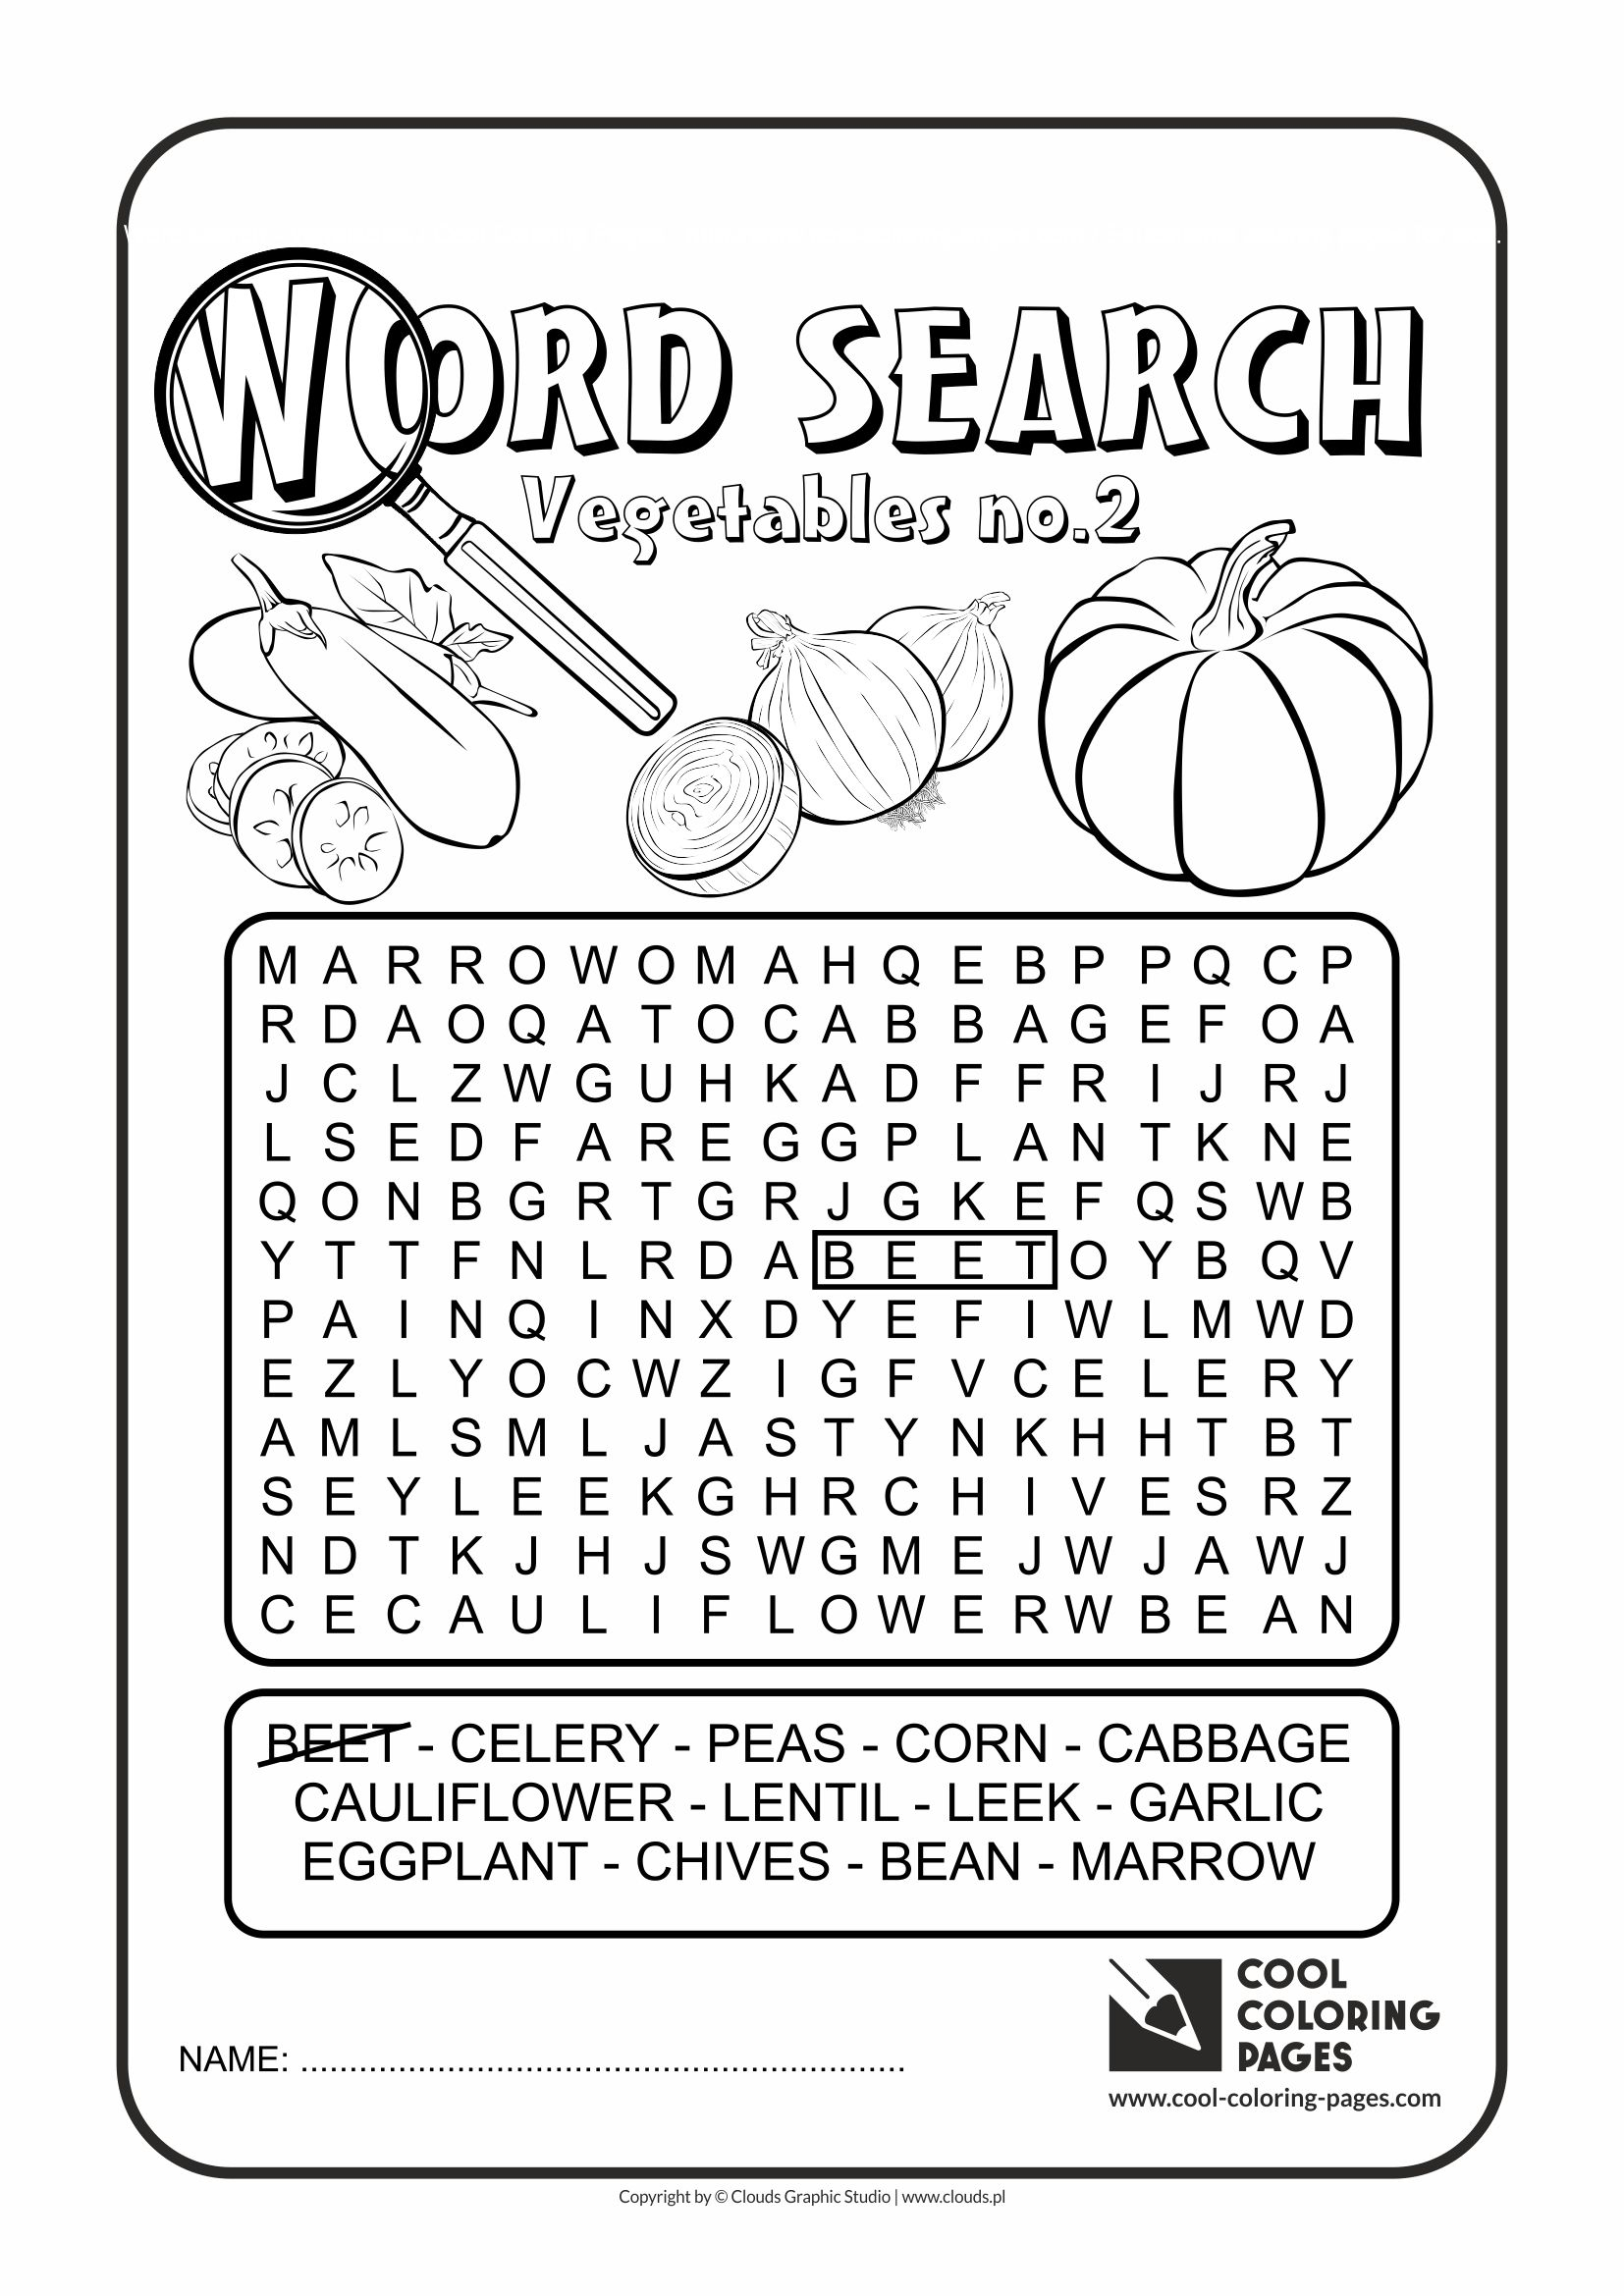 Word Search Coloring Pages Cool Coloring Pages Word Search Vegetables No 2 Cool Coloring